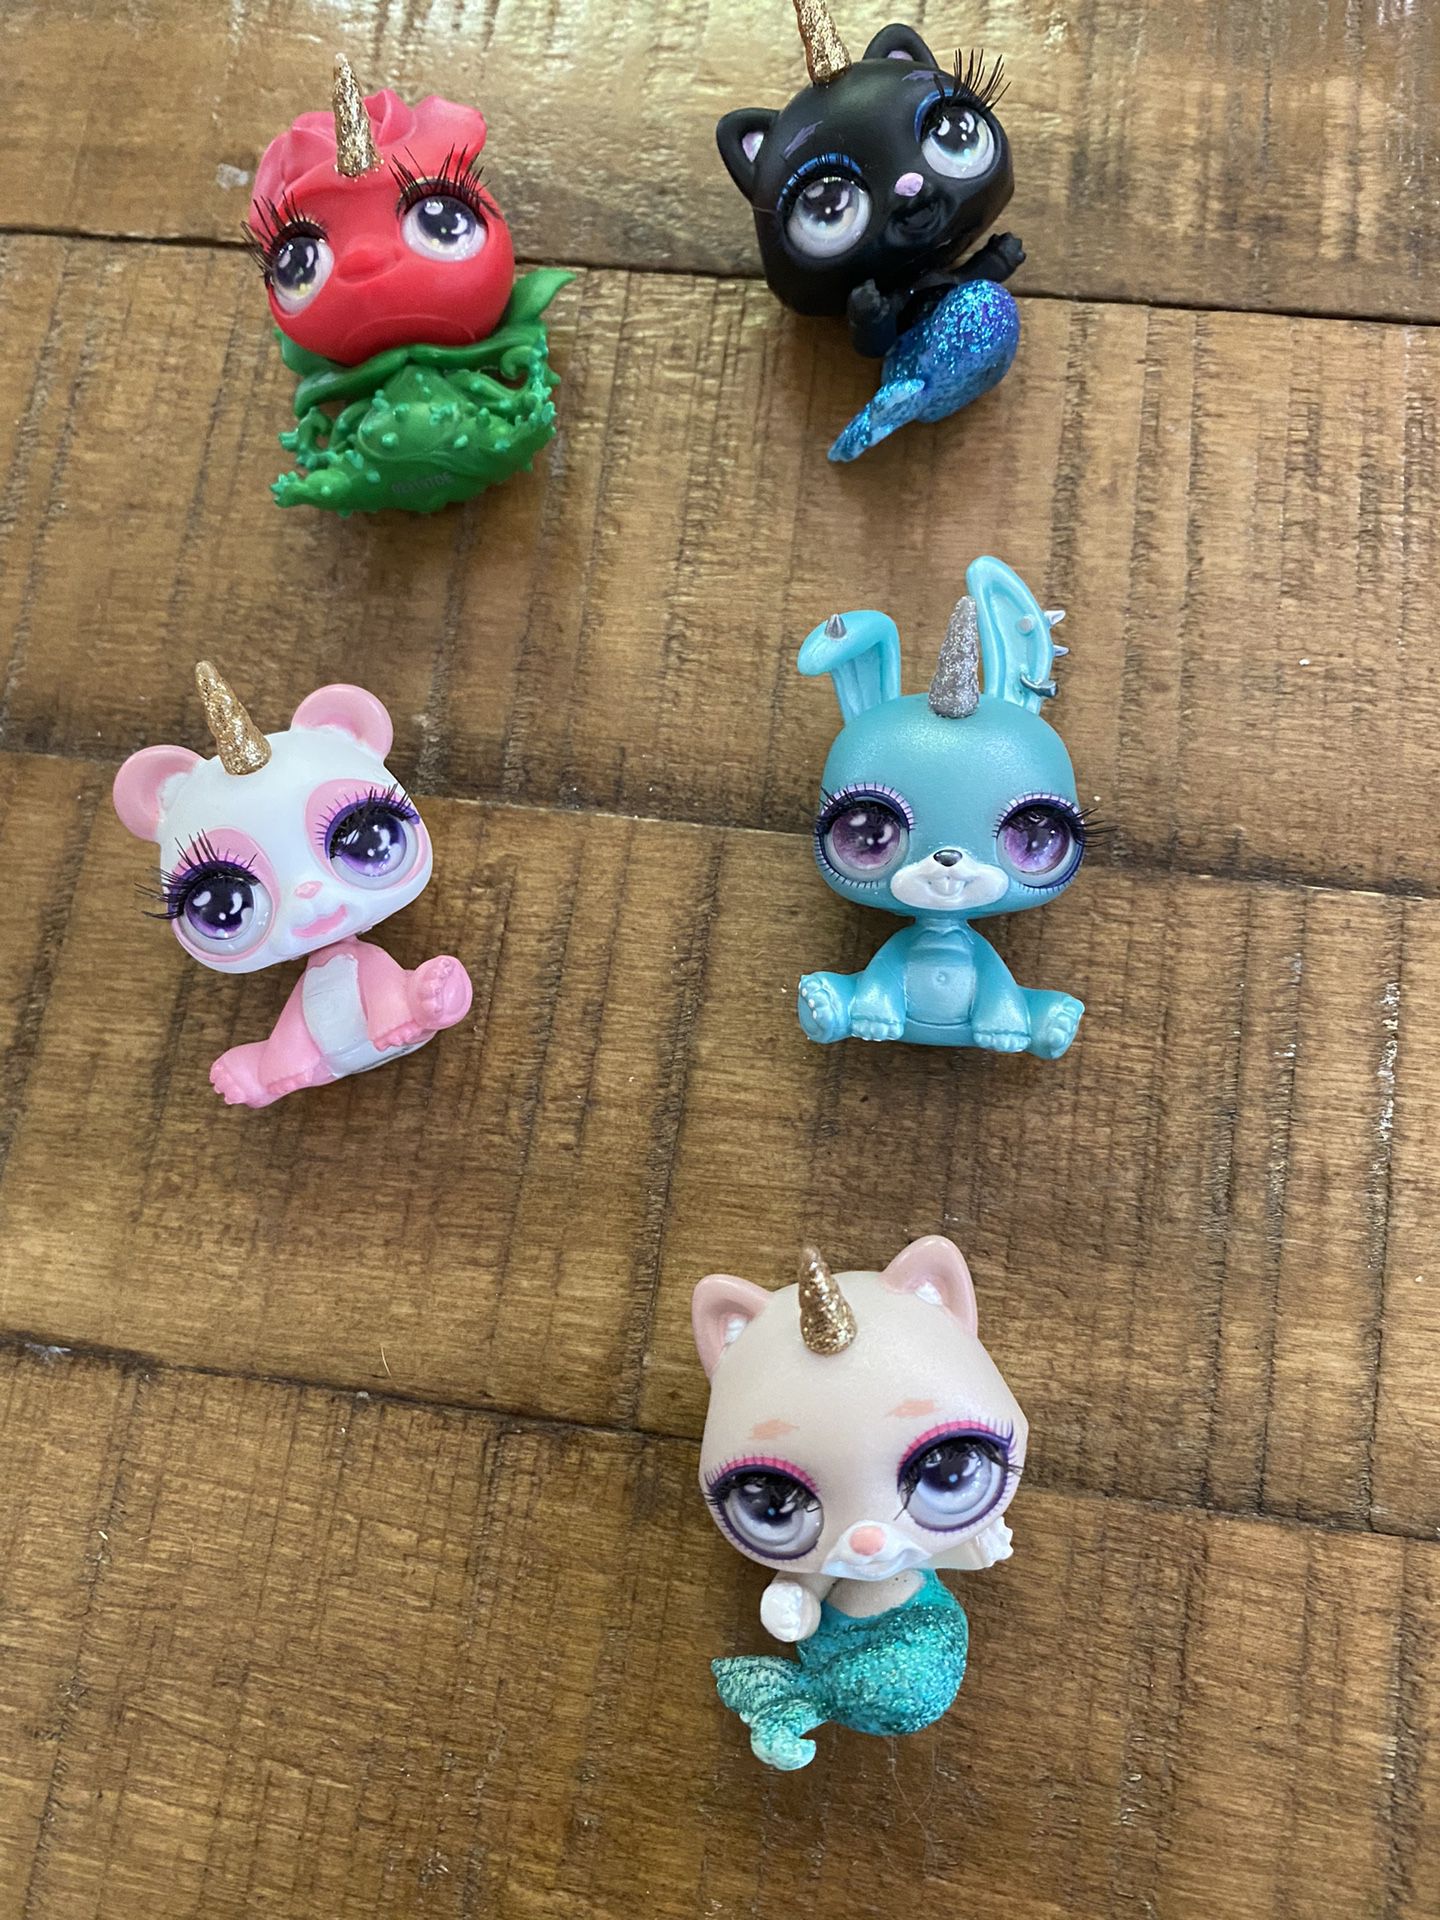 Poopsie pooey puitton slime surprise for Sale in Kent, WA - OfferUp